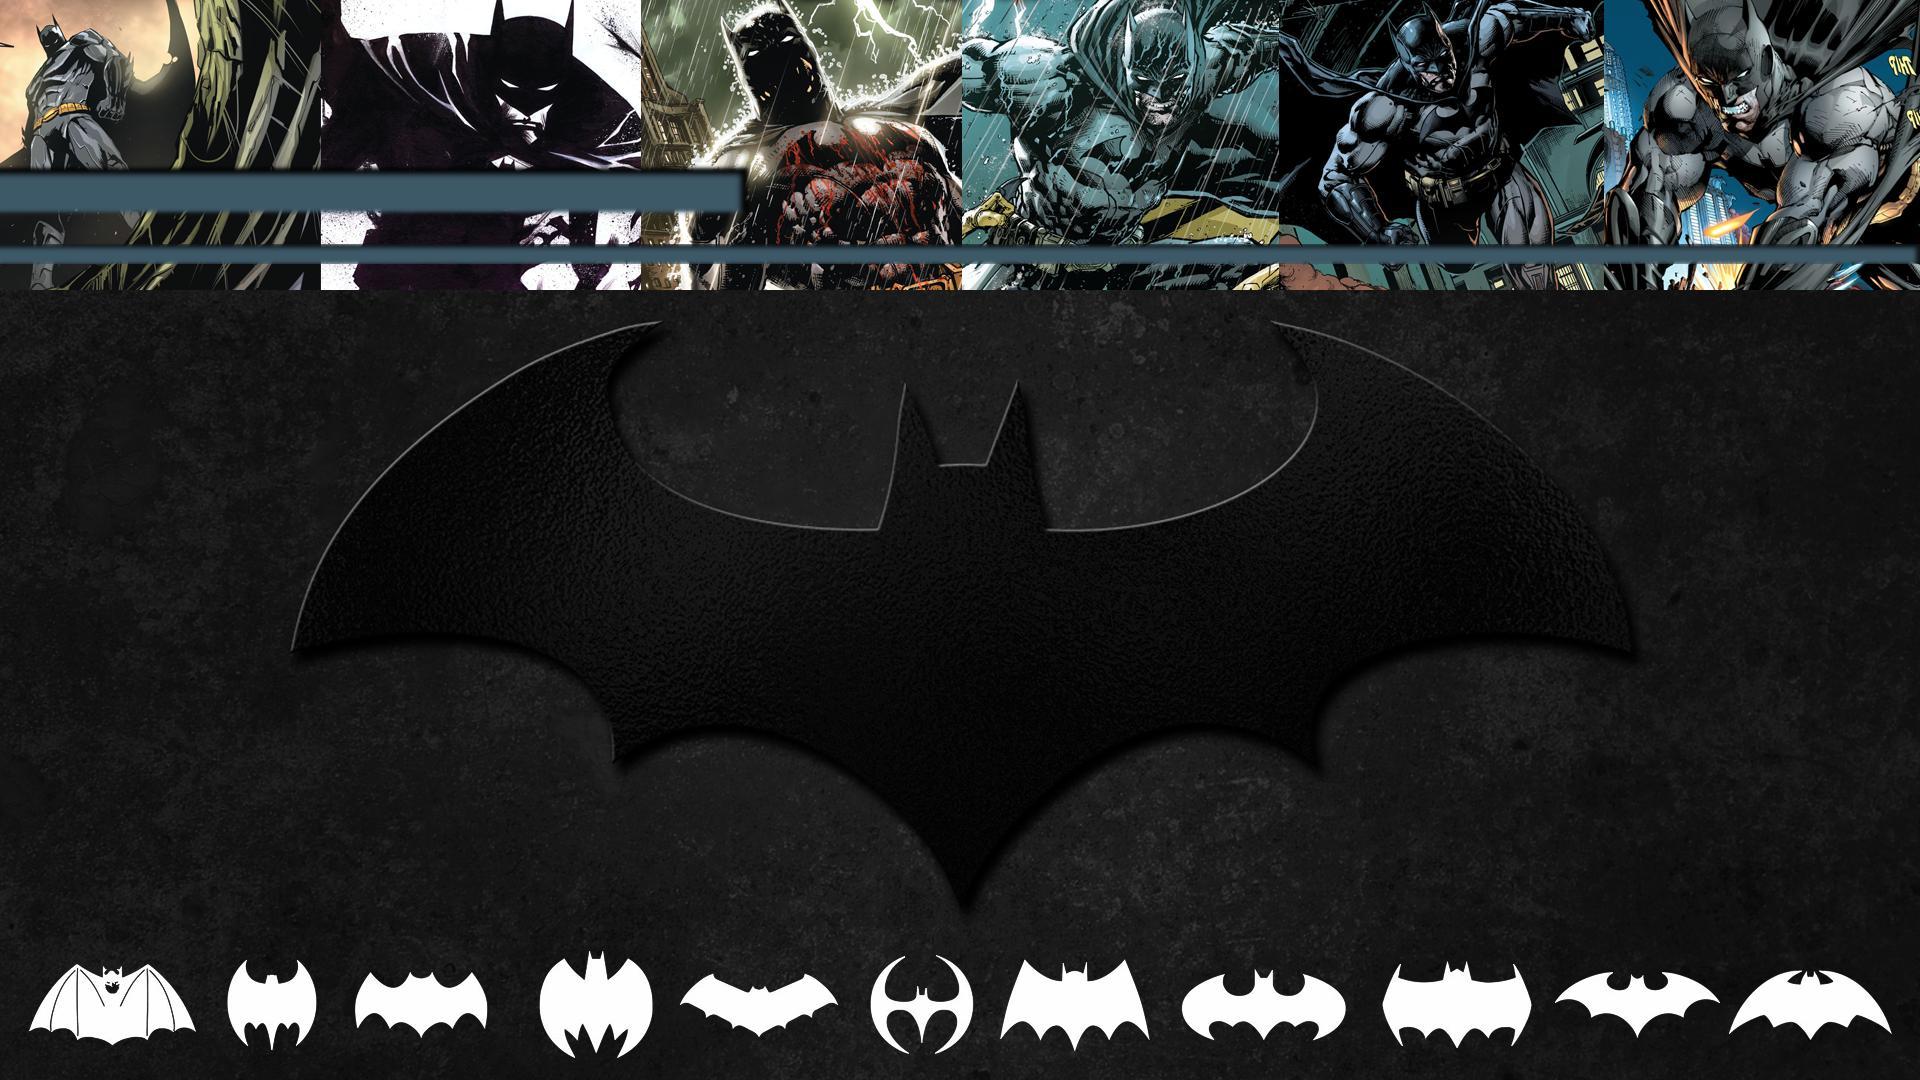 Updated the Batman theme I posted yesterday to bring out